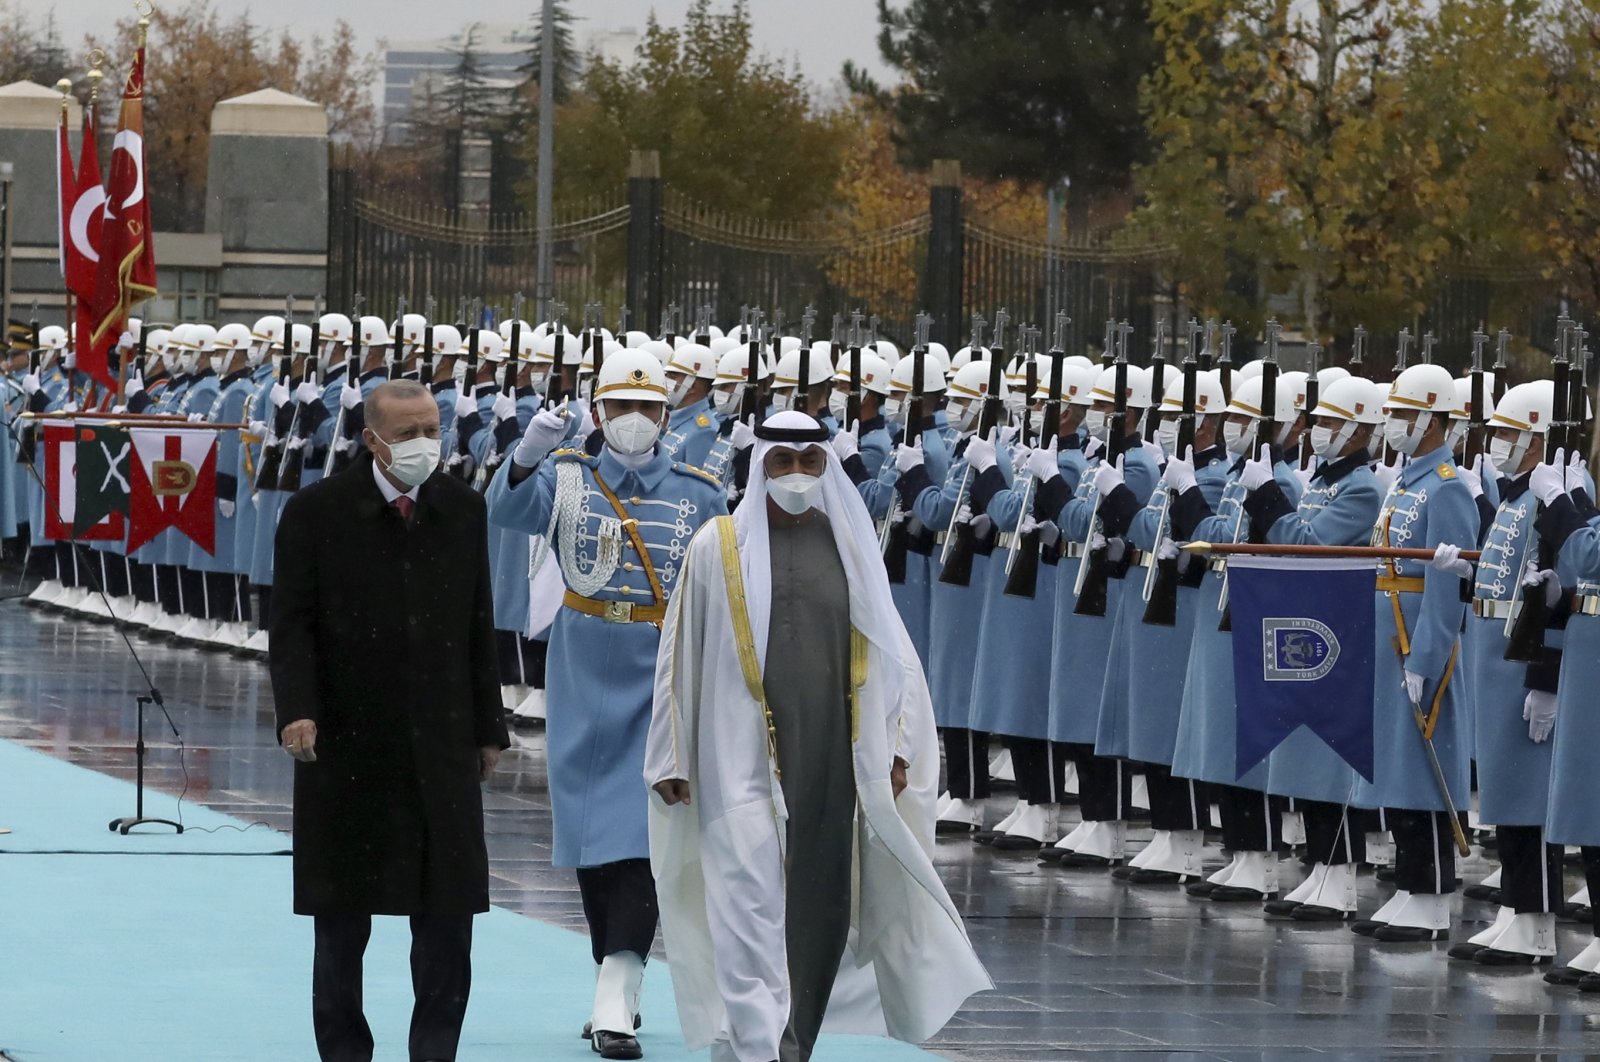 President Recep Tayyip Erdoğan (L) and Crown Prince Sheikh Mohammed bin Zayed Al Nahyan (MBZ) of the United Arab Emirates review a military honor guard during a welcoming ceremony at the presidential palace, in Ankara, Turkey, Nov. 24, 2021. (AP Photo)